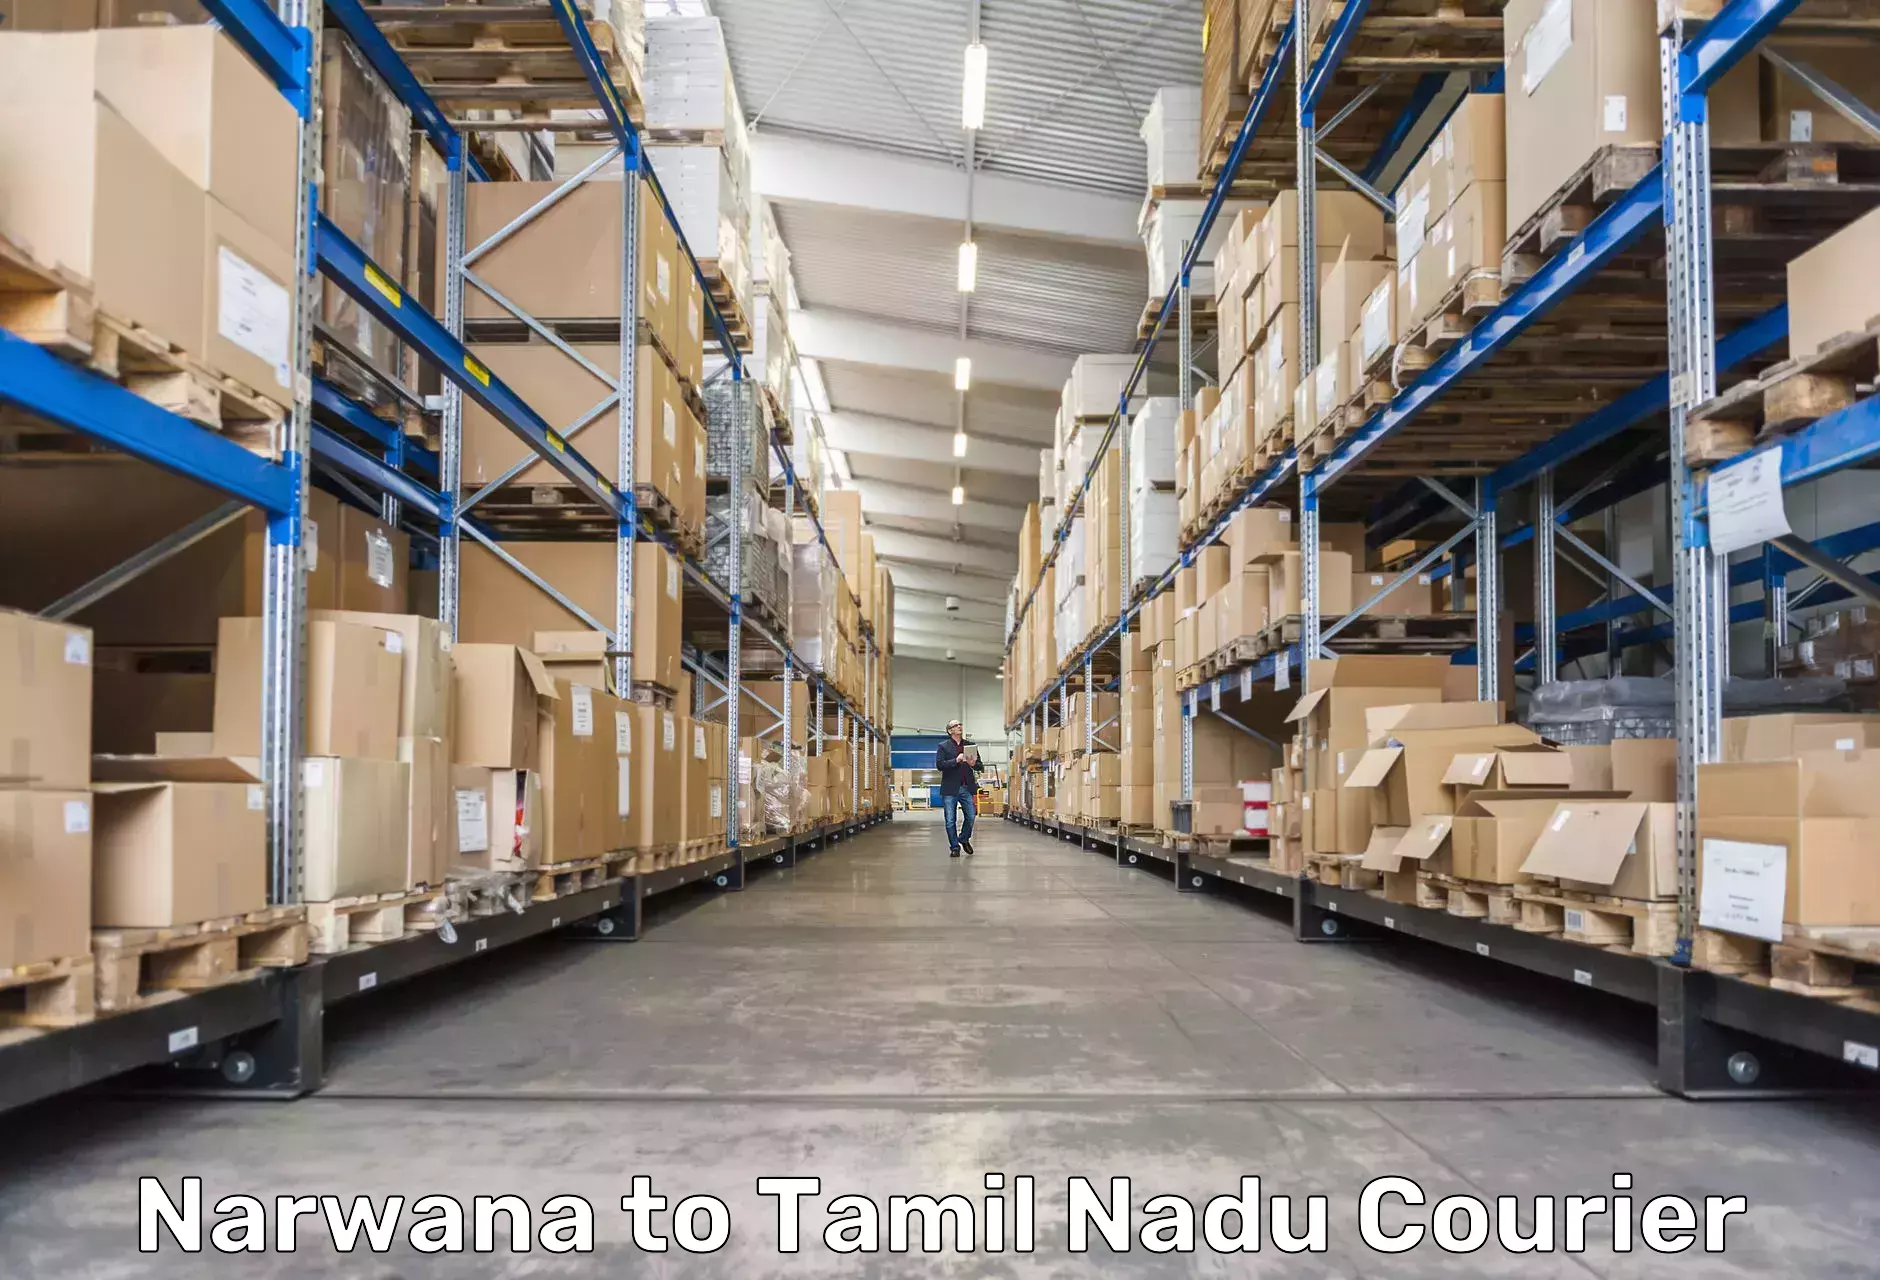 Flexible delivery schedules Narwana to Ennore Port Chennai